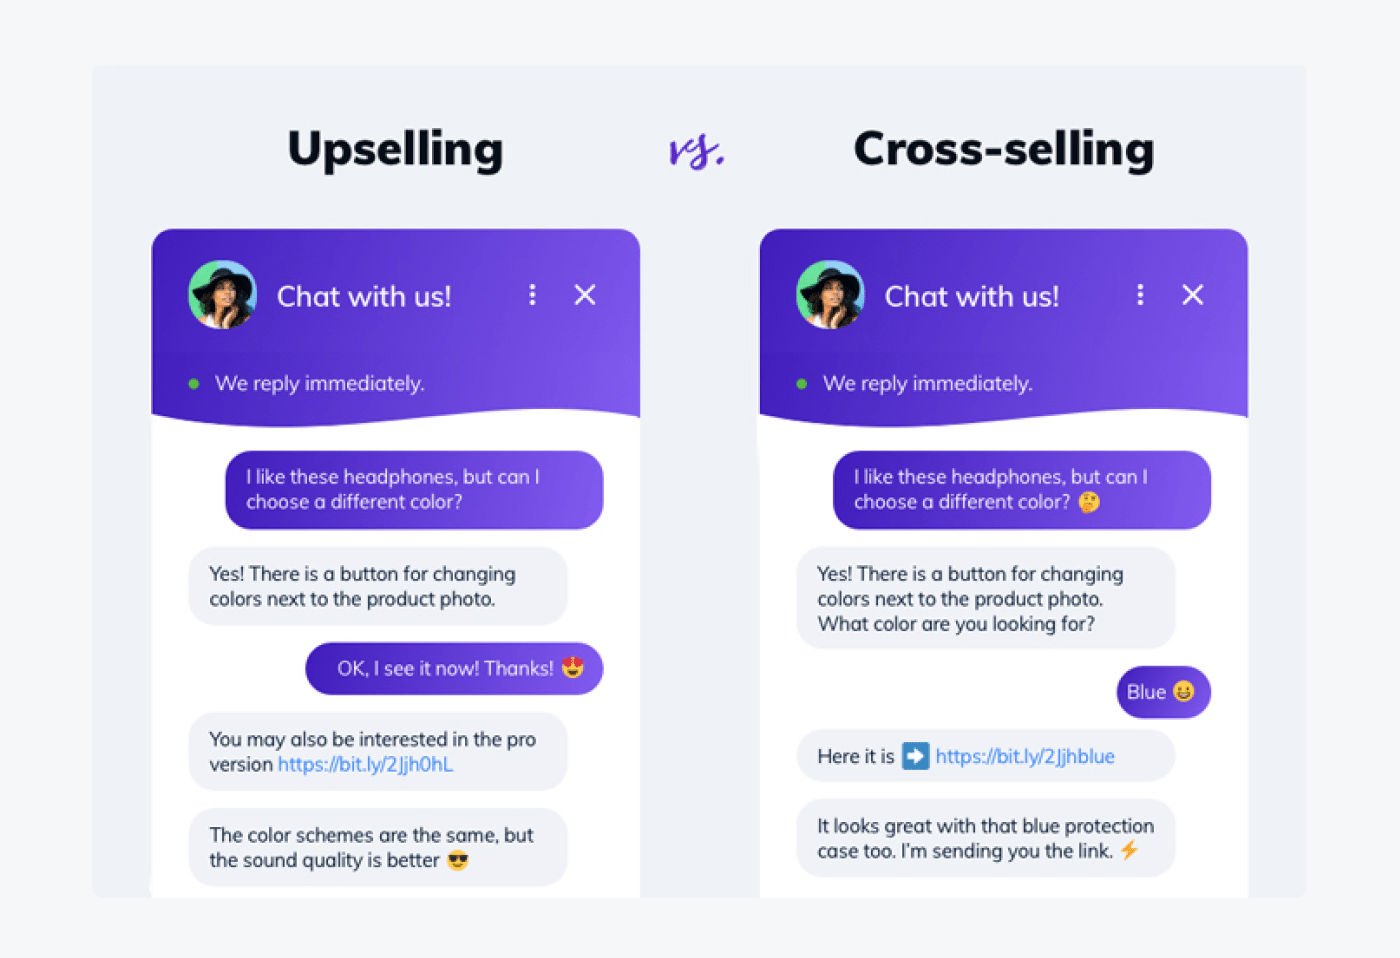 upselling vs. cross-selling messages comparison